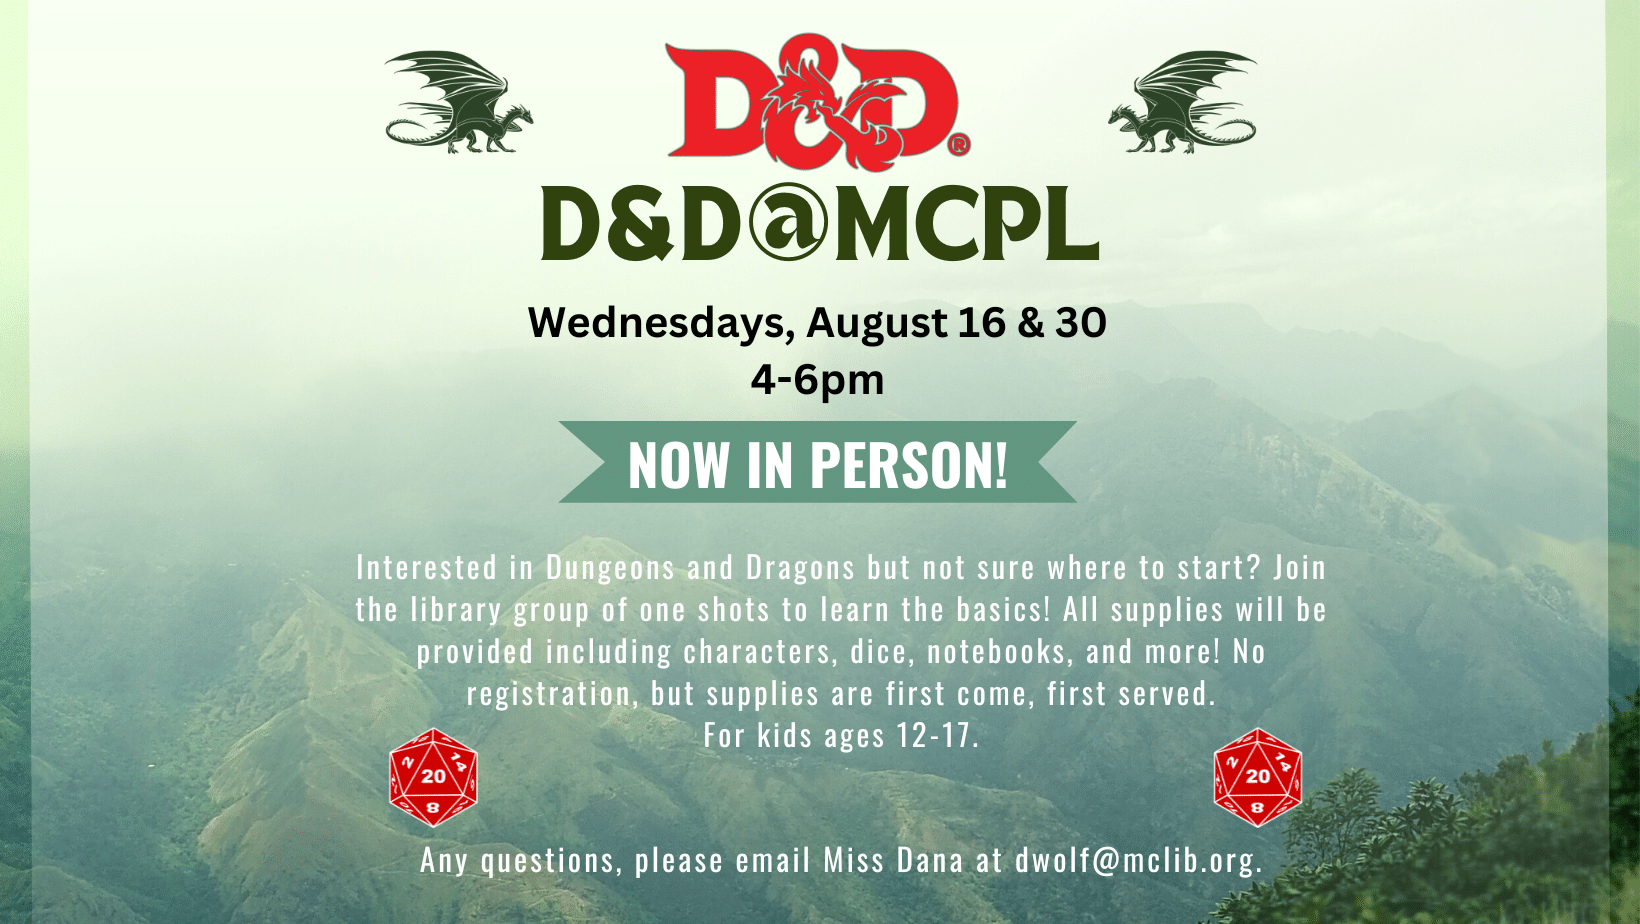 D&D at MCPL, ages 12-17, Wednesdays, August 16 & 30 @ 4:00 PM. In person!